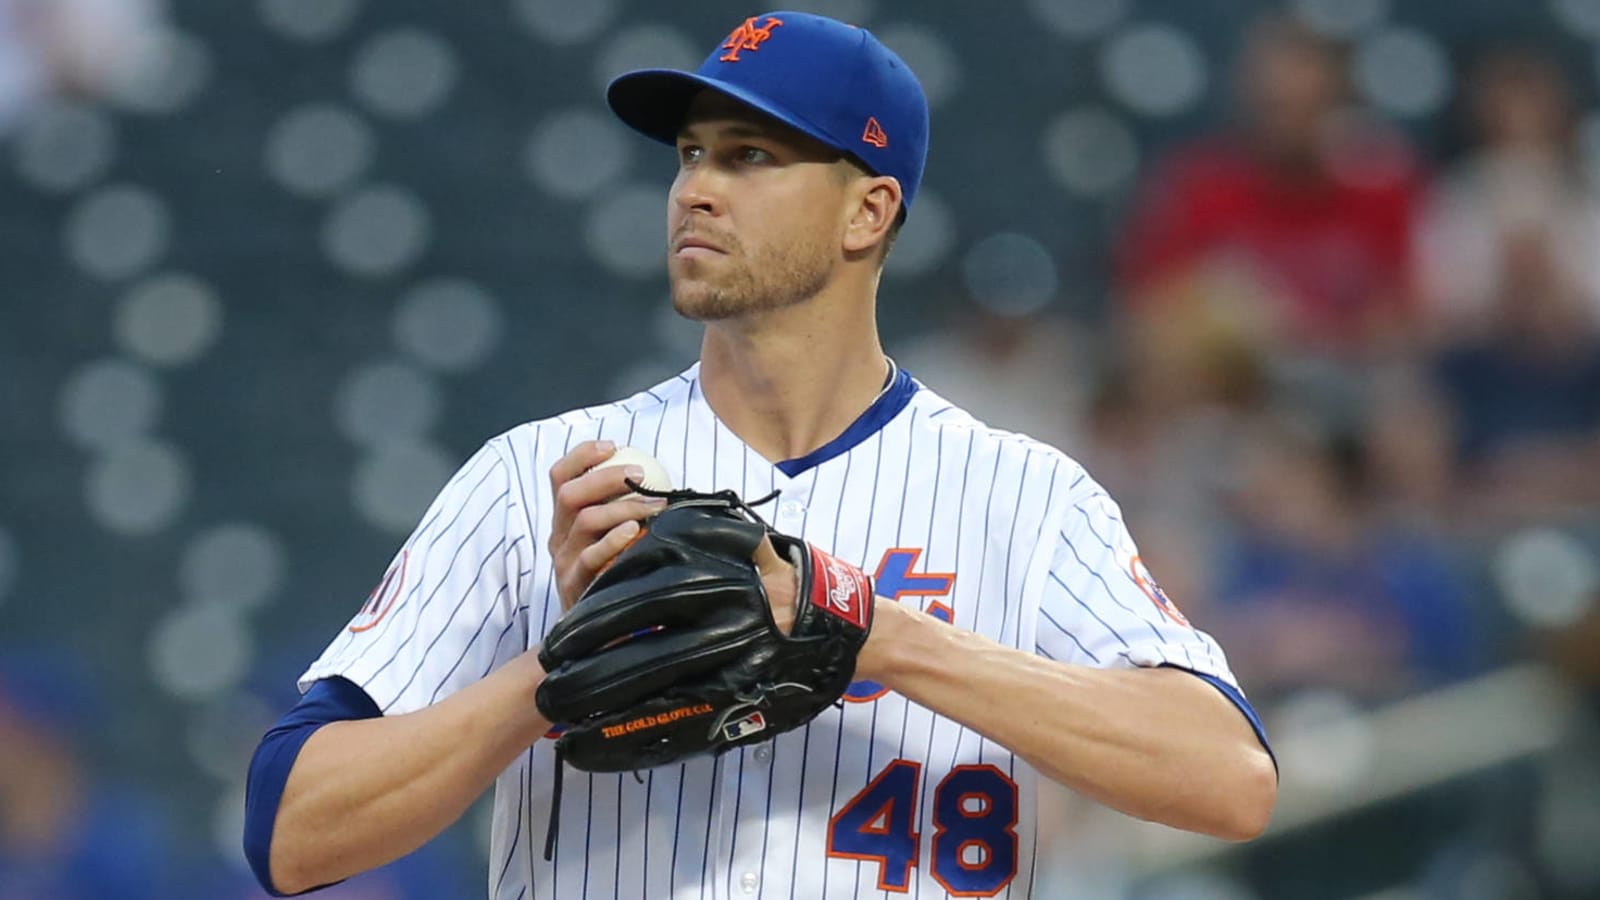 Jacob deGrom exits due to right shoulder issues